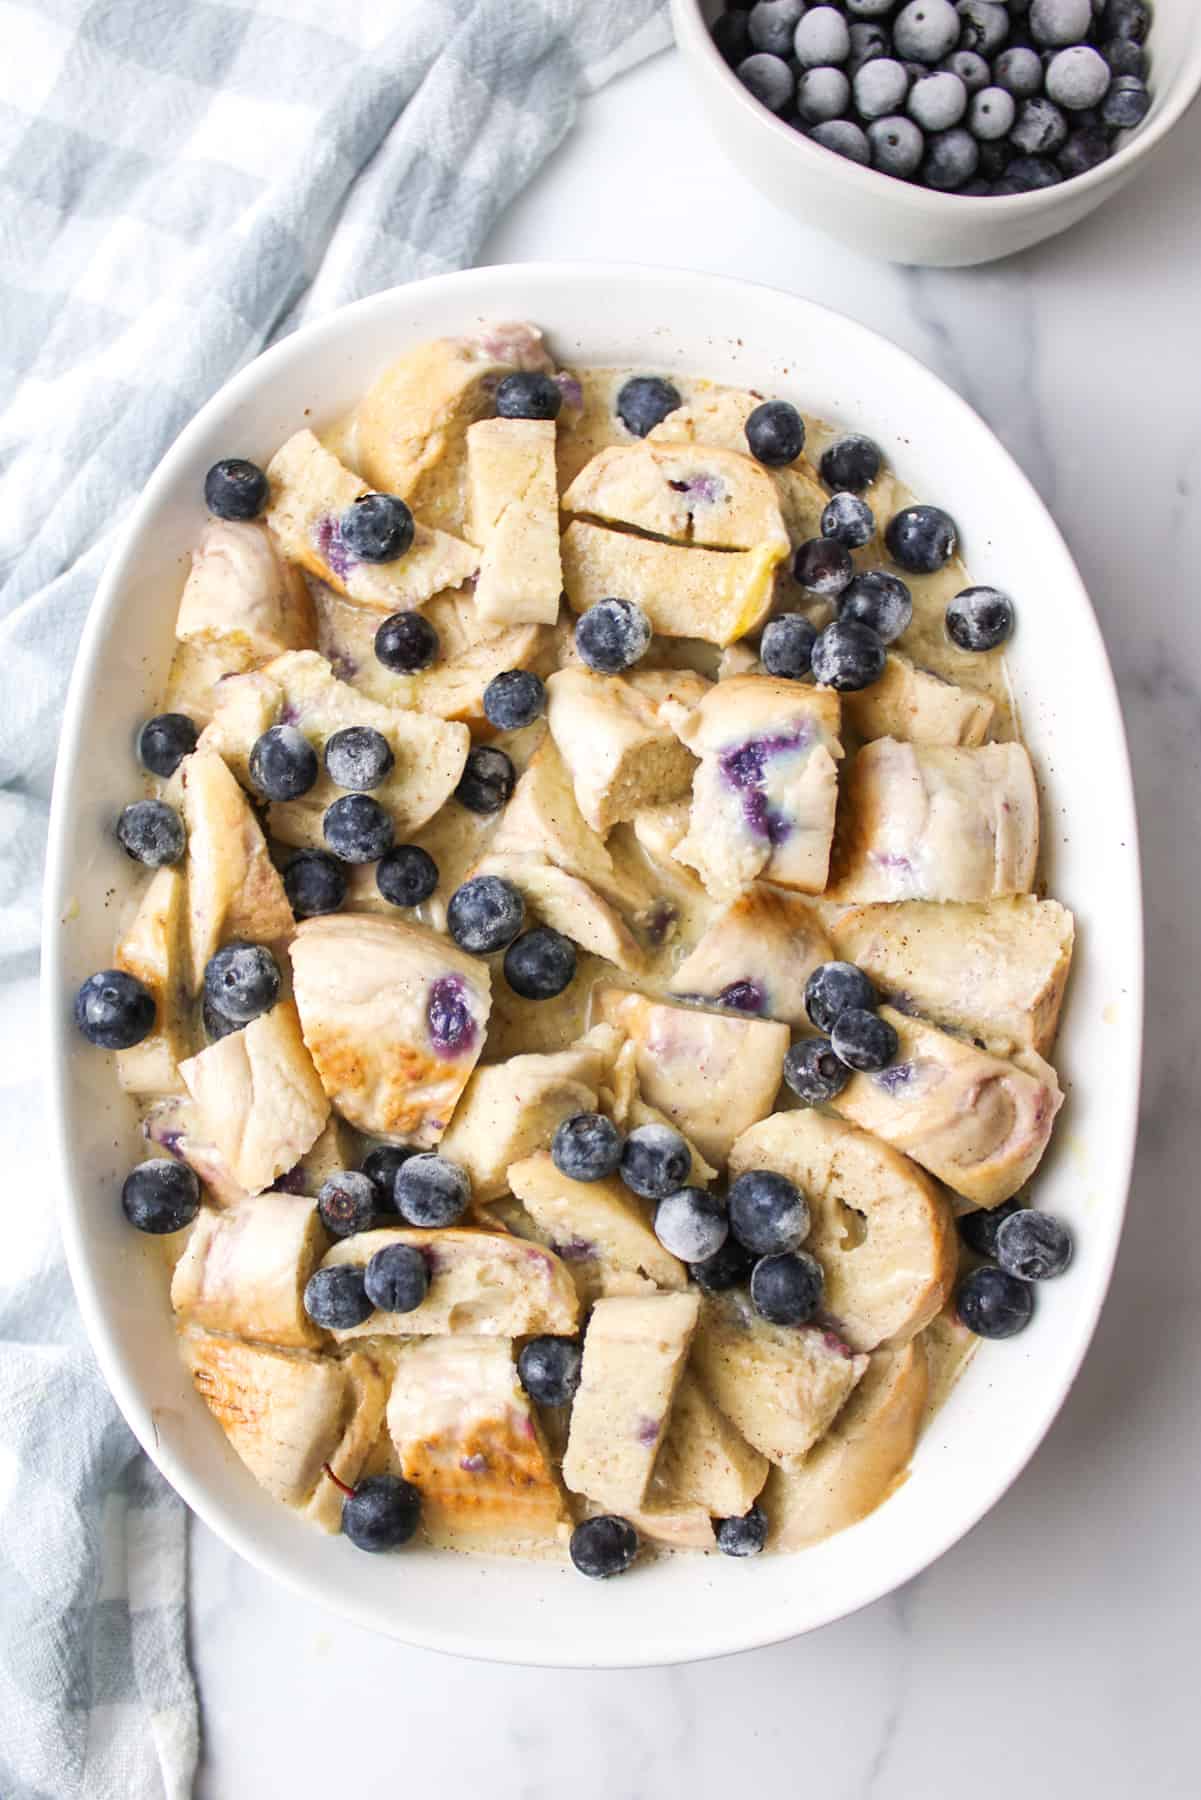 blueberry topped bread and egg mixture in a casserole dish.